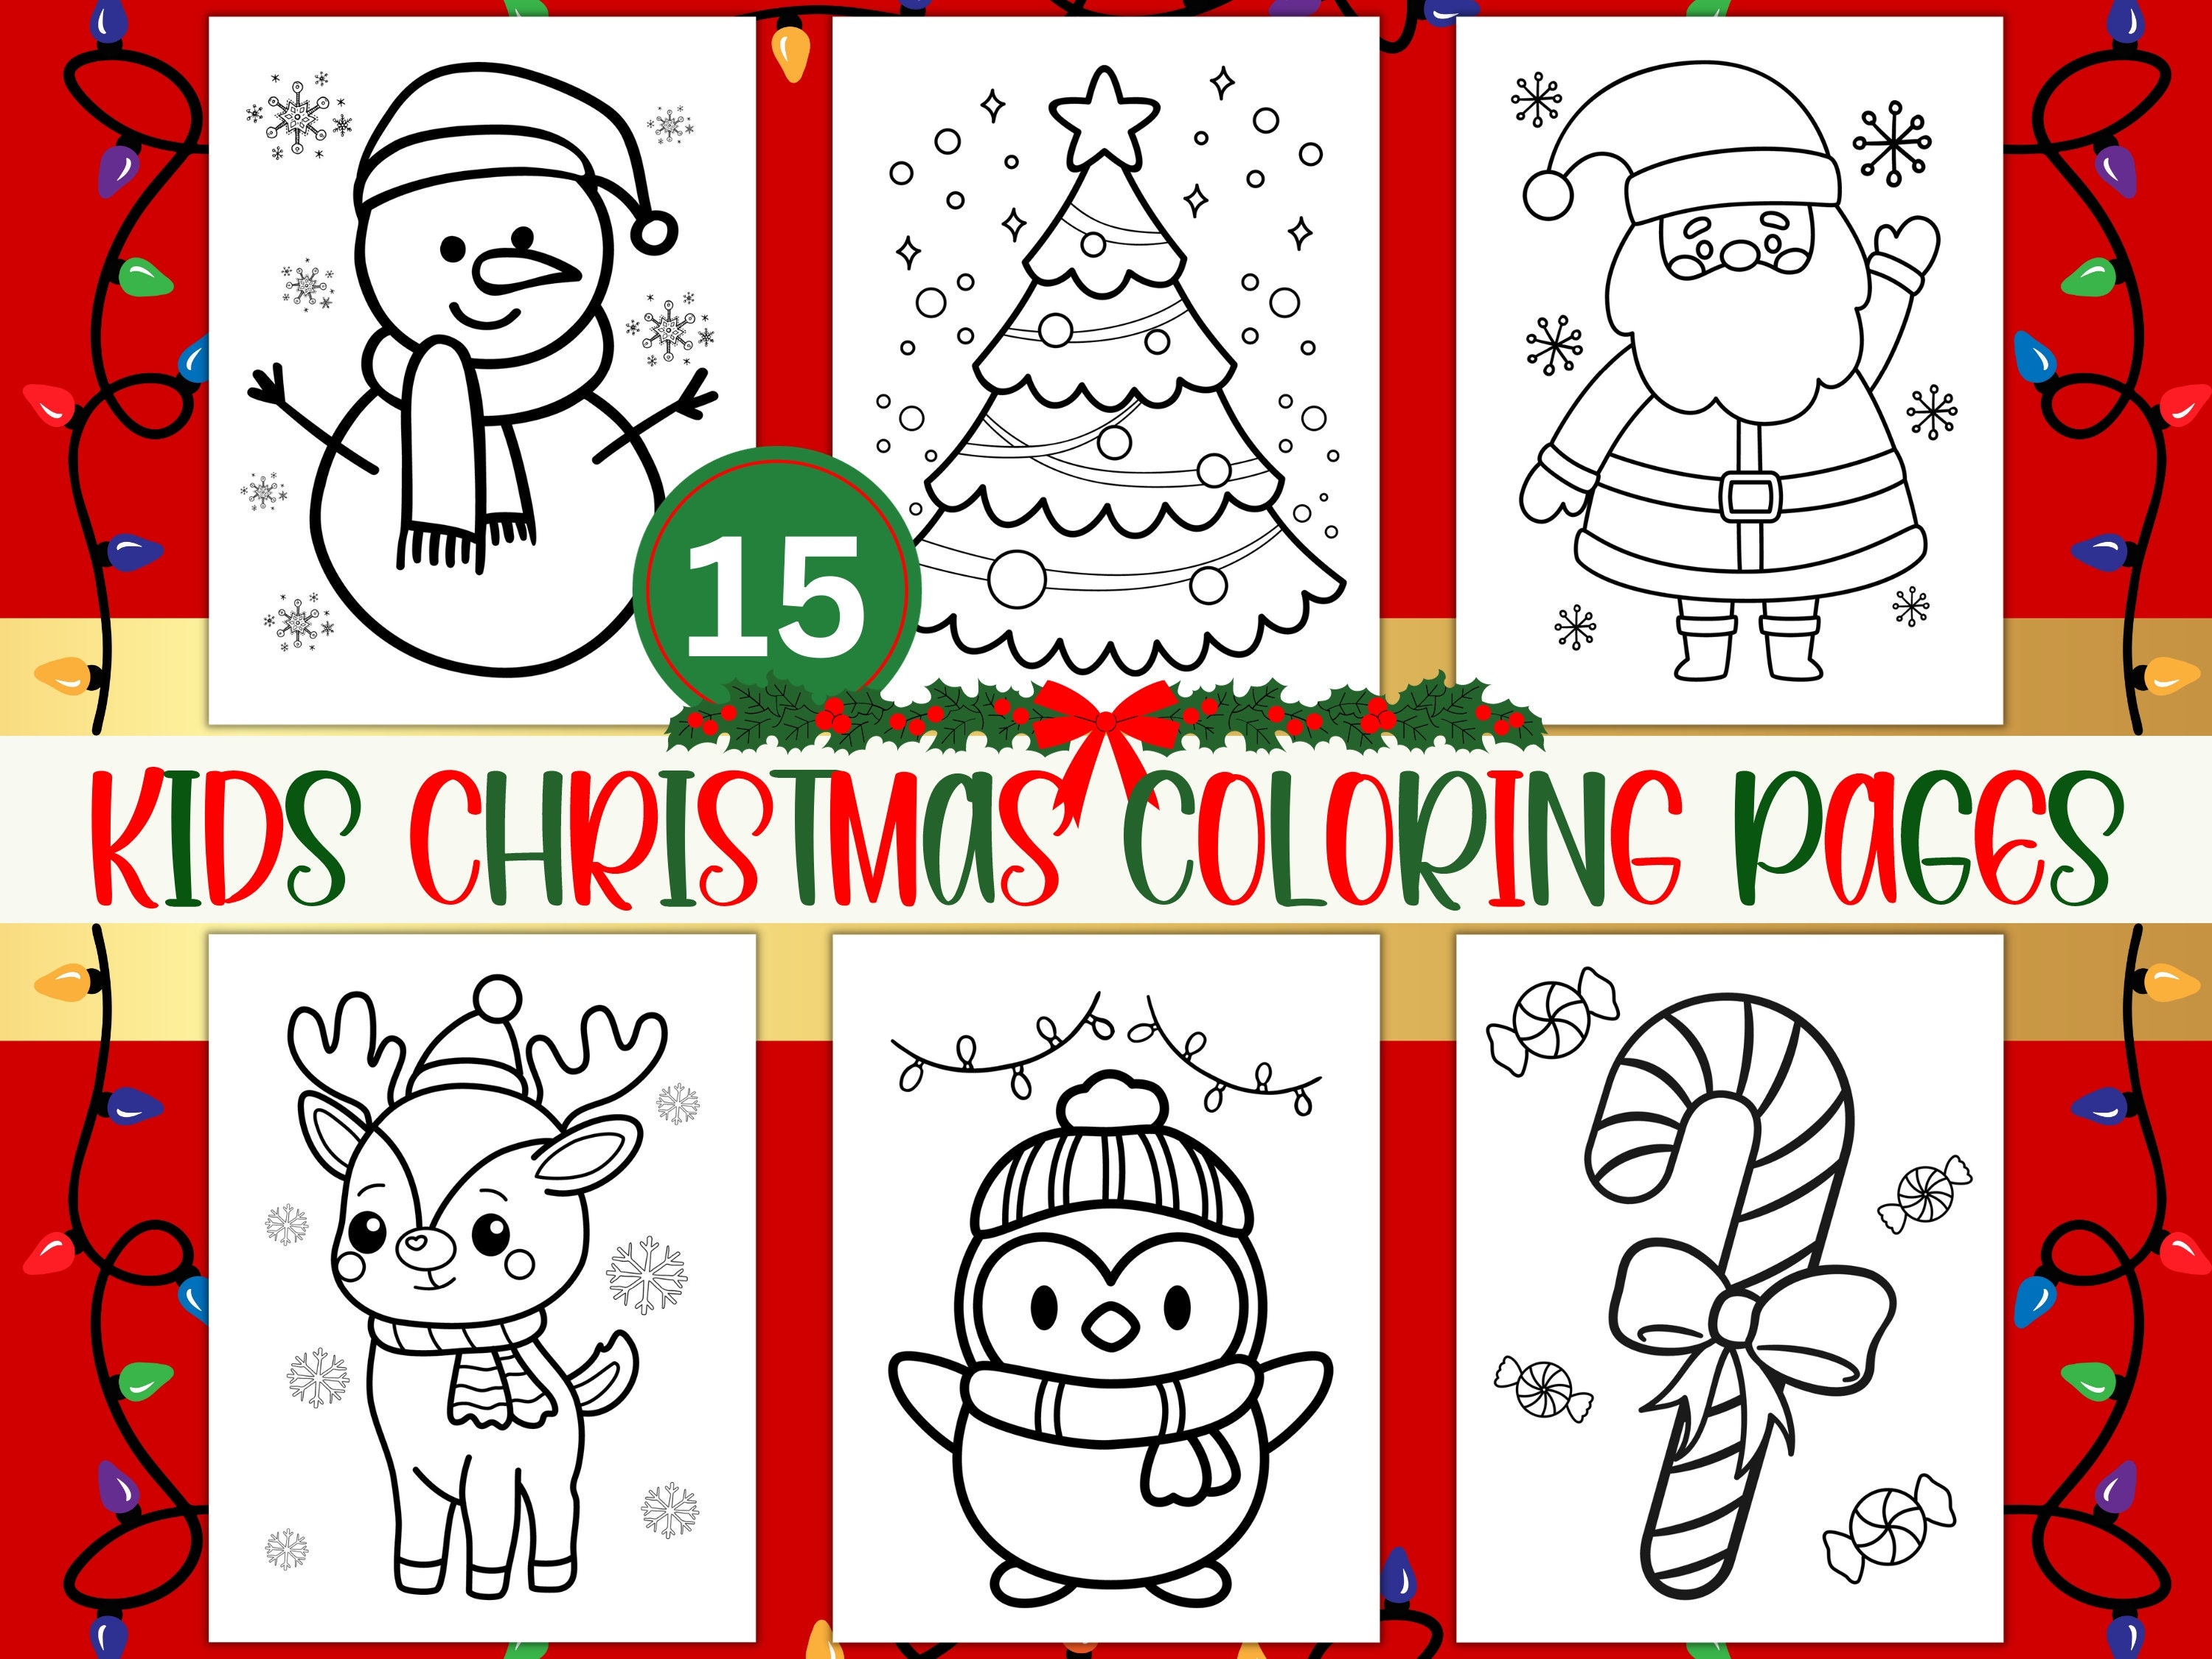 Coloring Pages for Kids Printable, Rainbow Coloring Page, Kawaii